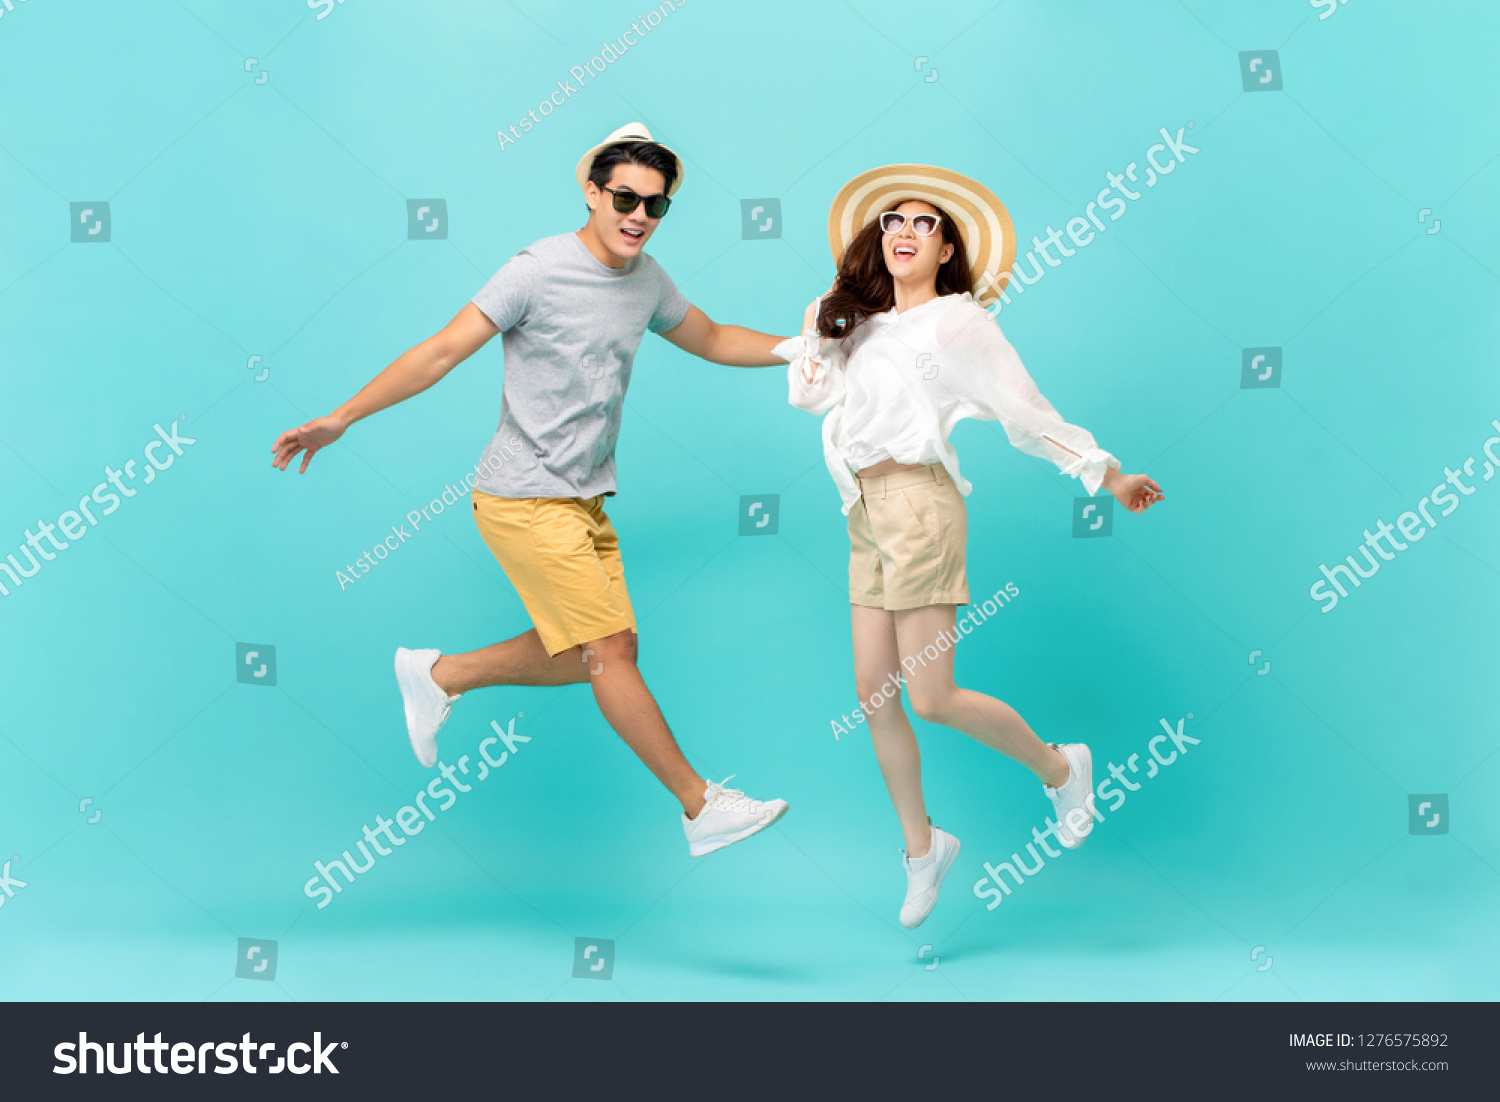 Playful energetic Asian couple in summer beach casual clothes jumping isolated on light blue background studio shot #1276575892